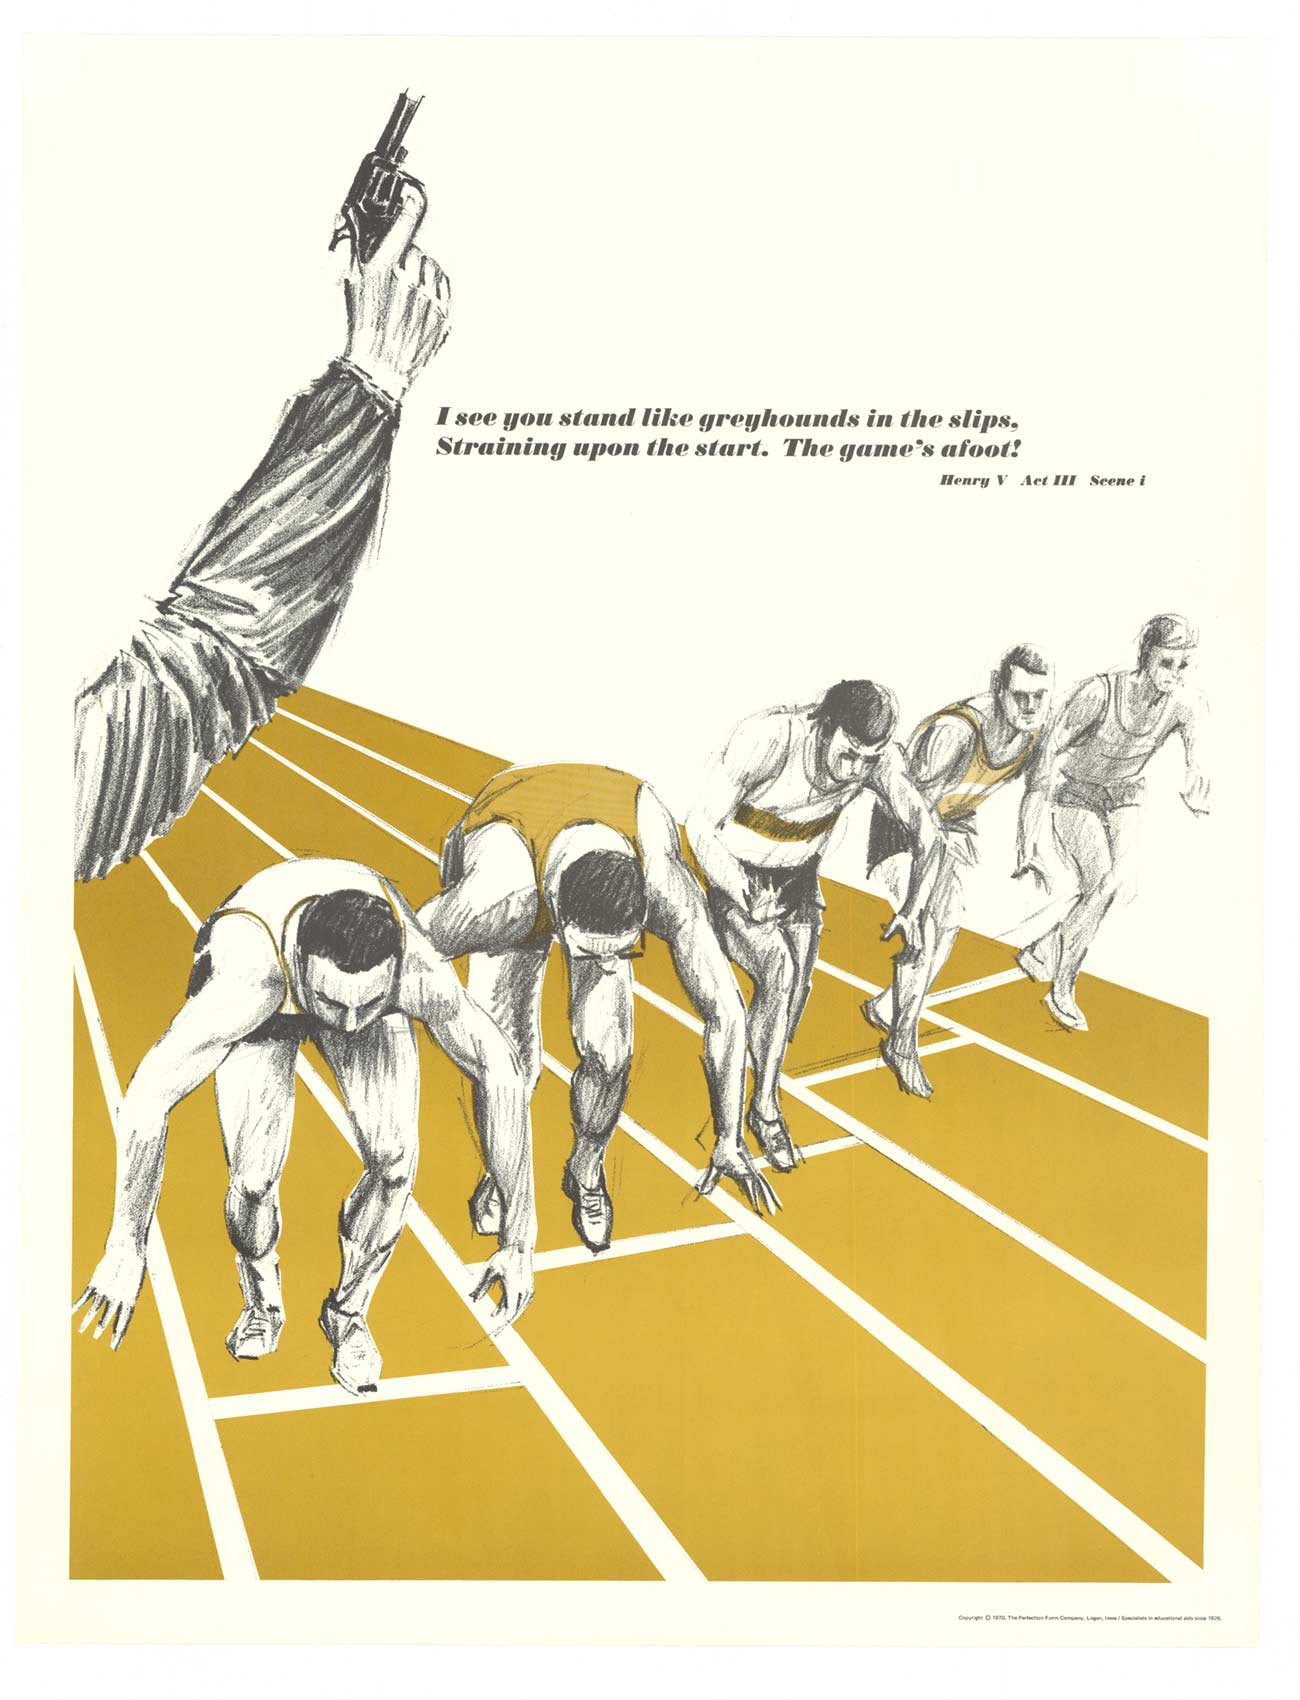 This linen-backed 1970 vintage poster, created by The Perfection Form Company, features a captivating image of men on a track field. It showcases an original quote from Shakespeare's Henry V, Act III, Scene I: "I see you stand like greyhounds in the slips